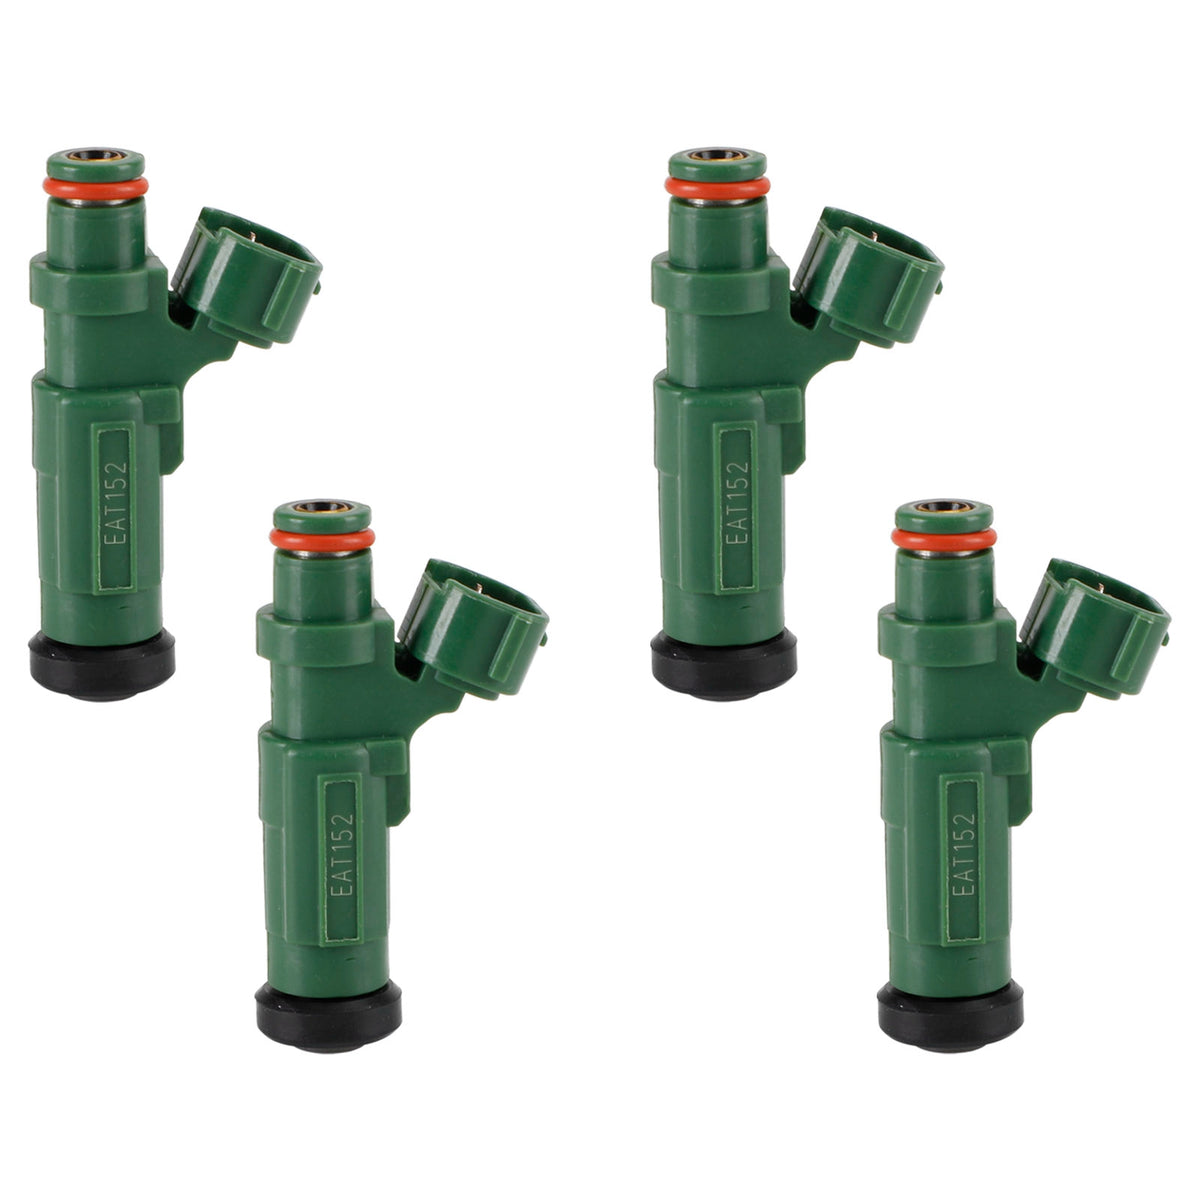 4PCS Yamaha Outboard F150 150HP Fuel Injector New Version 63P-13761-01-00